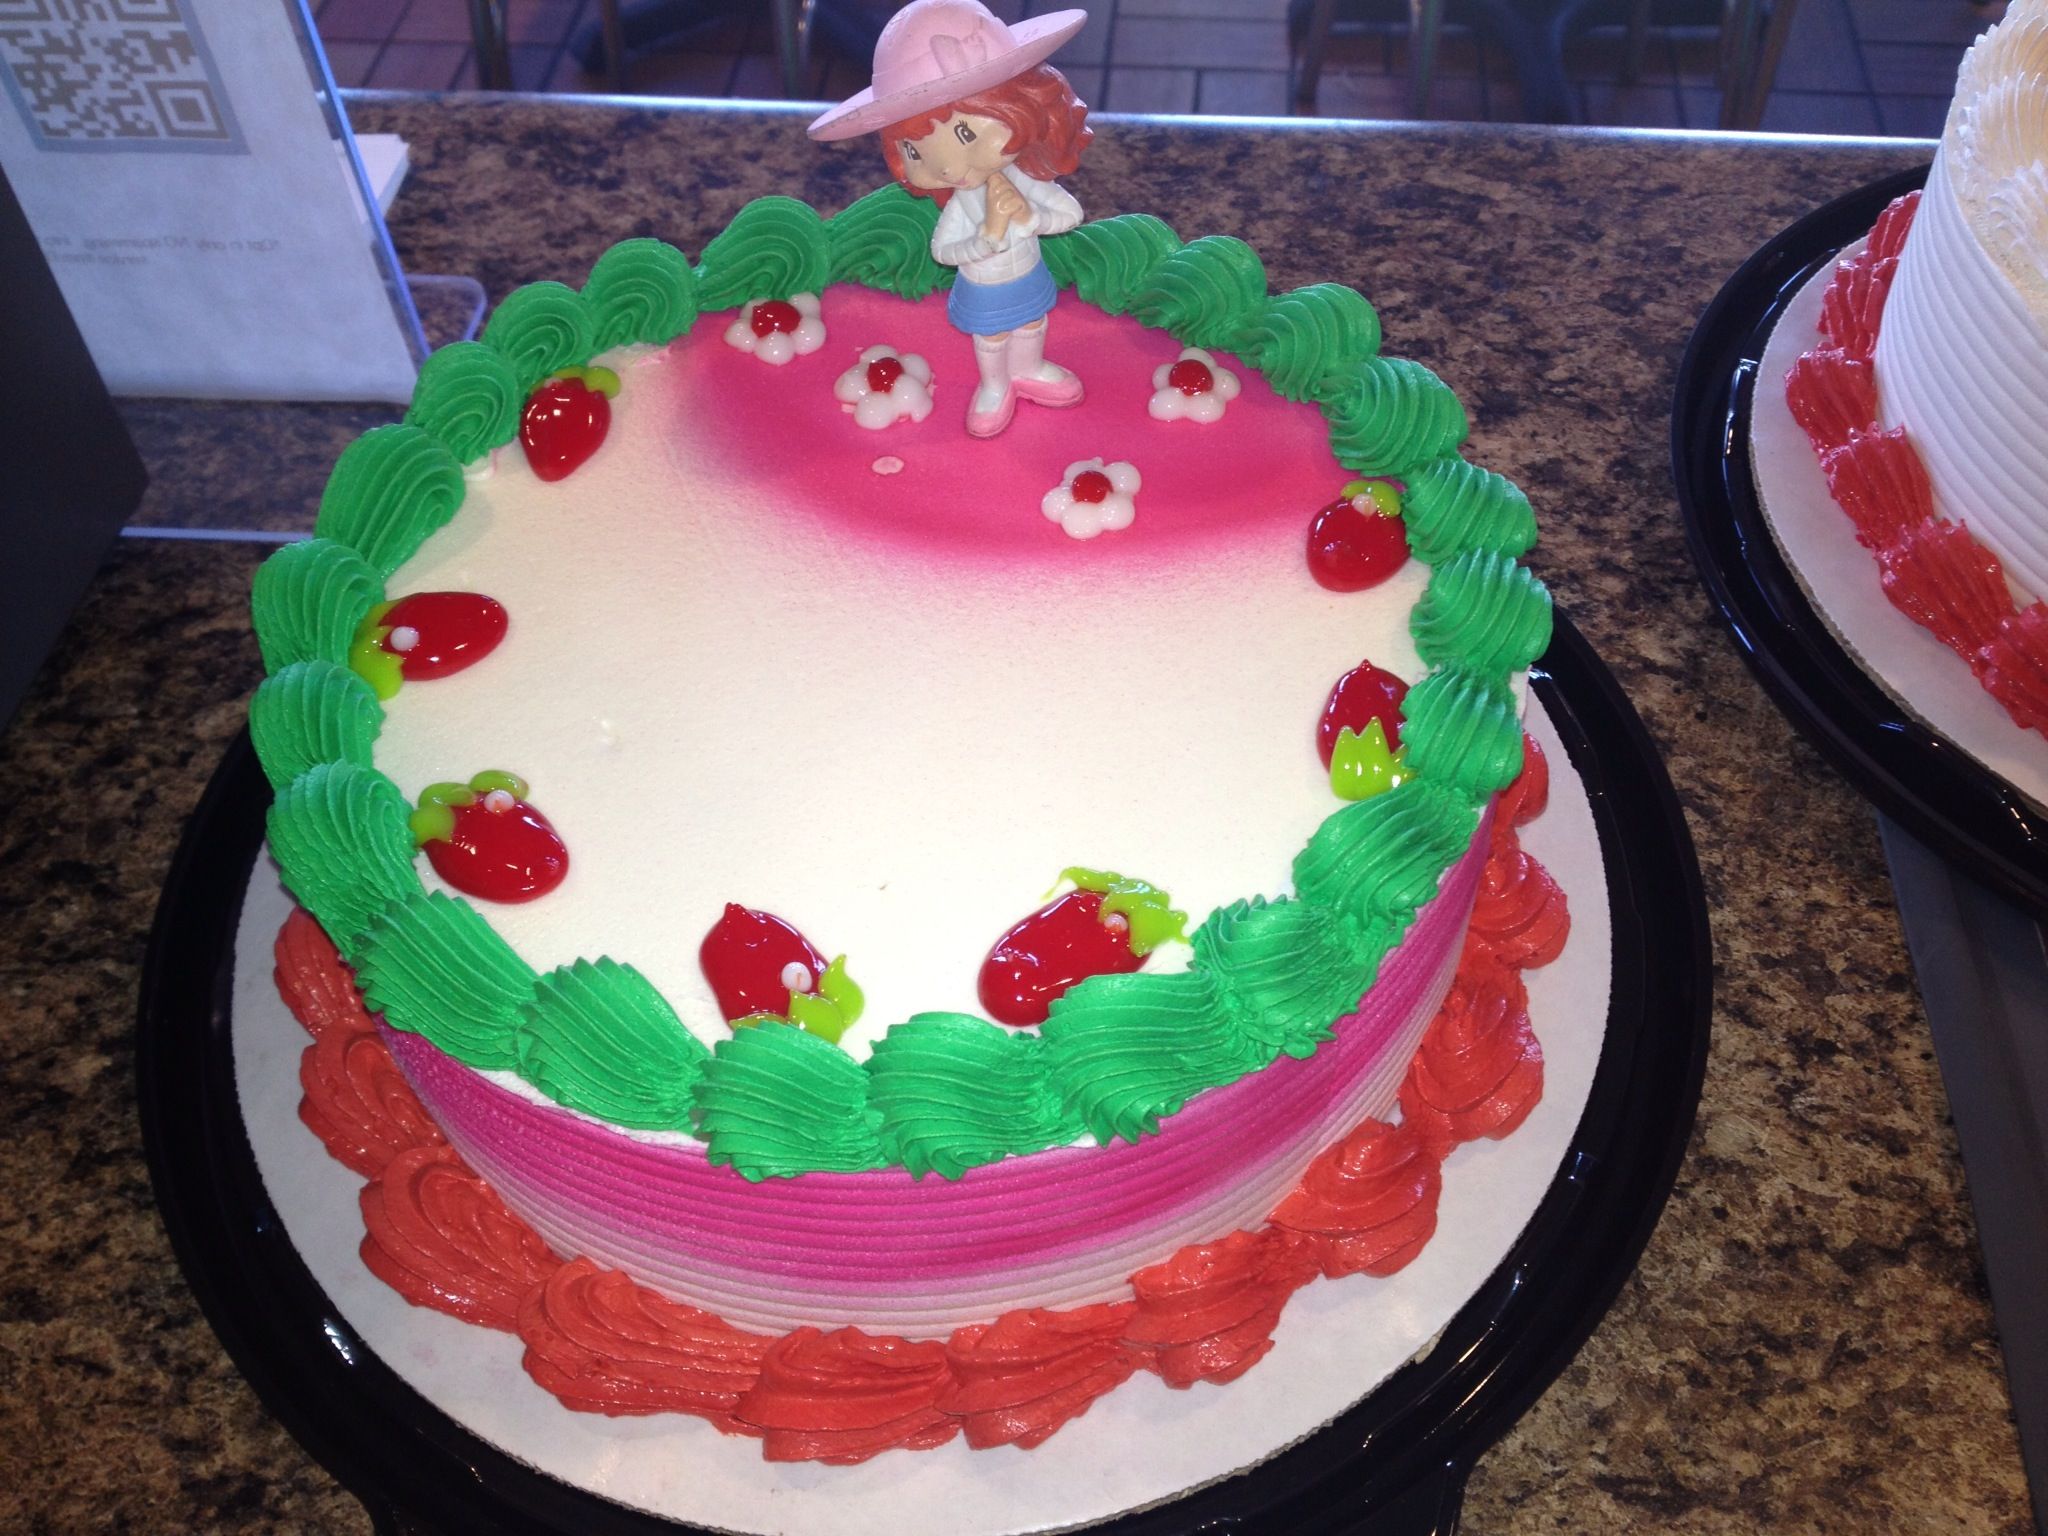 Strawberry Shortcake Dq cakes...Dairy Queen